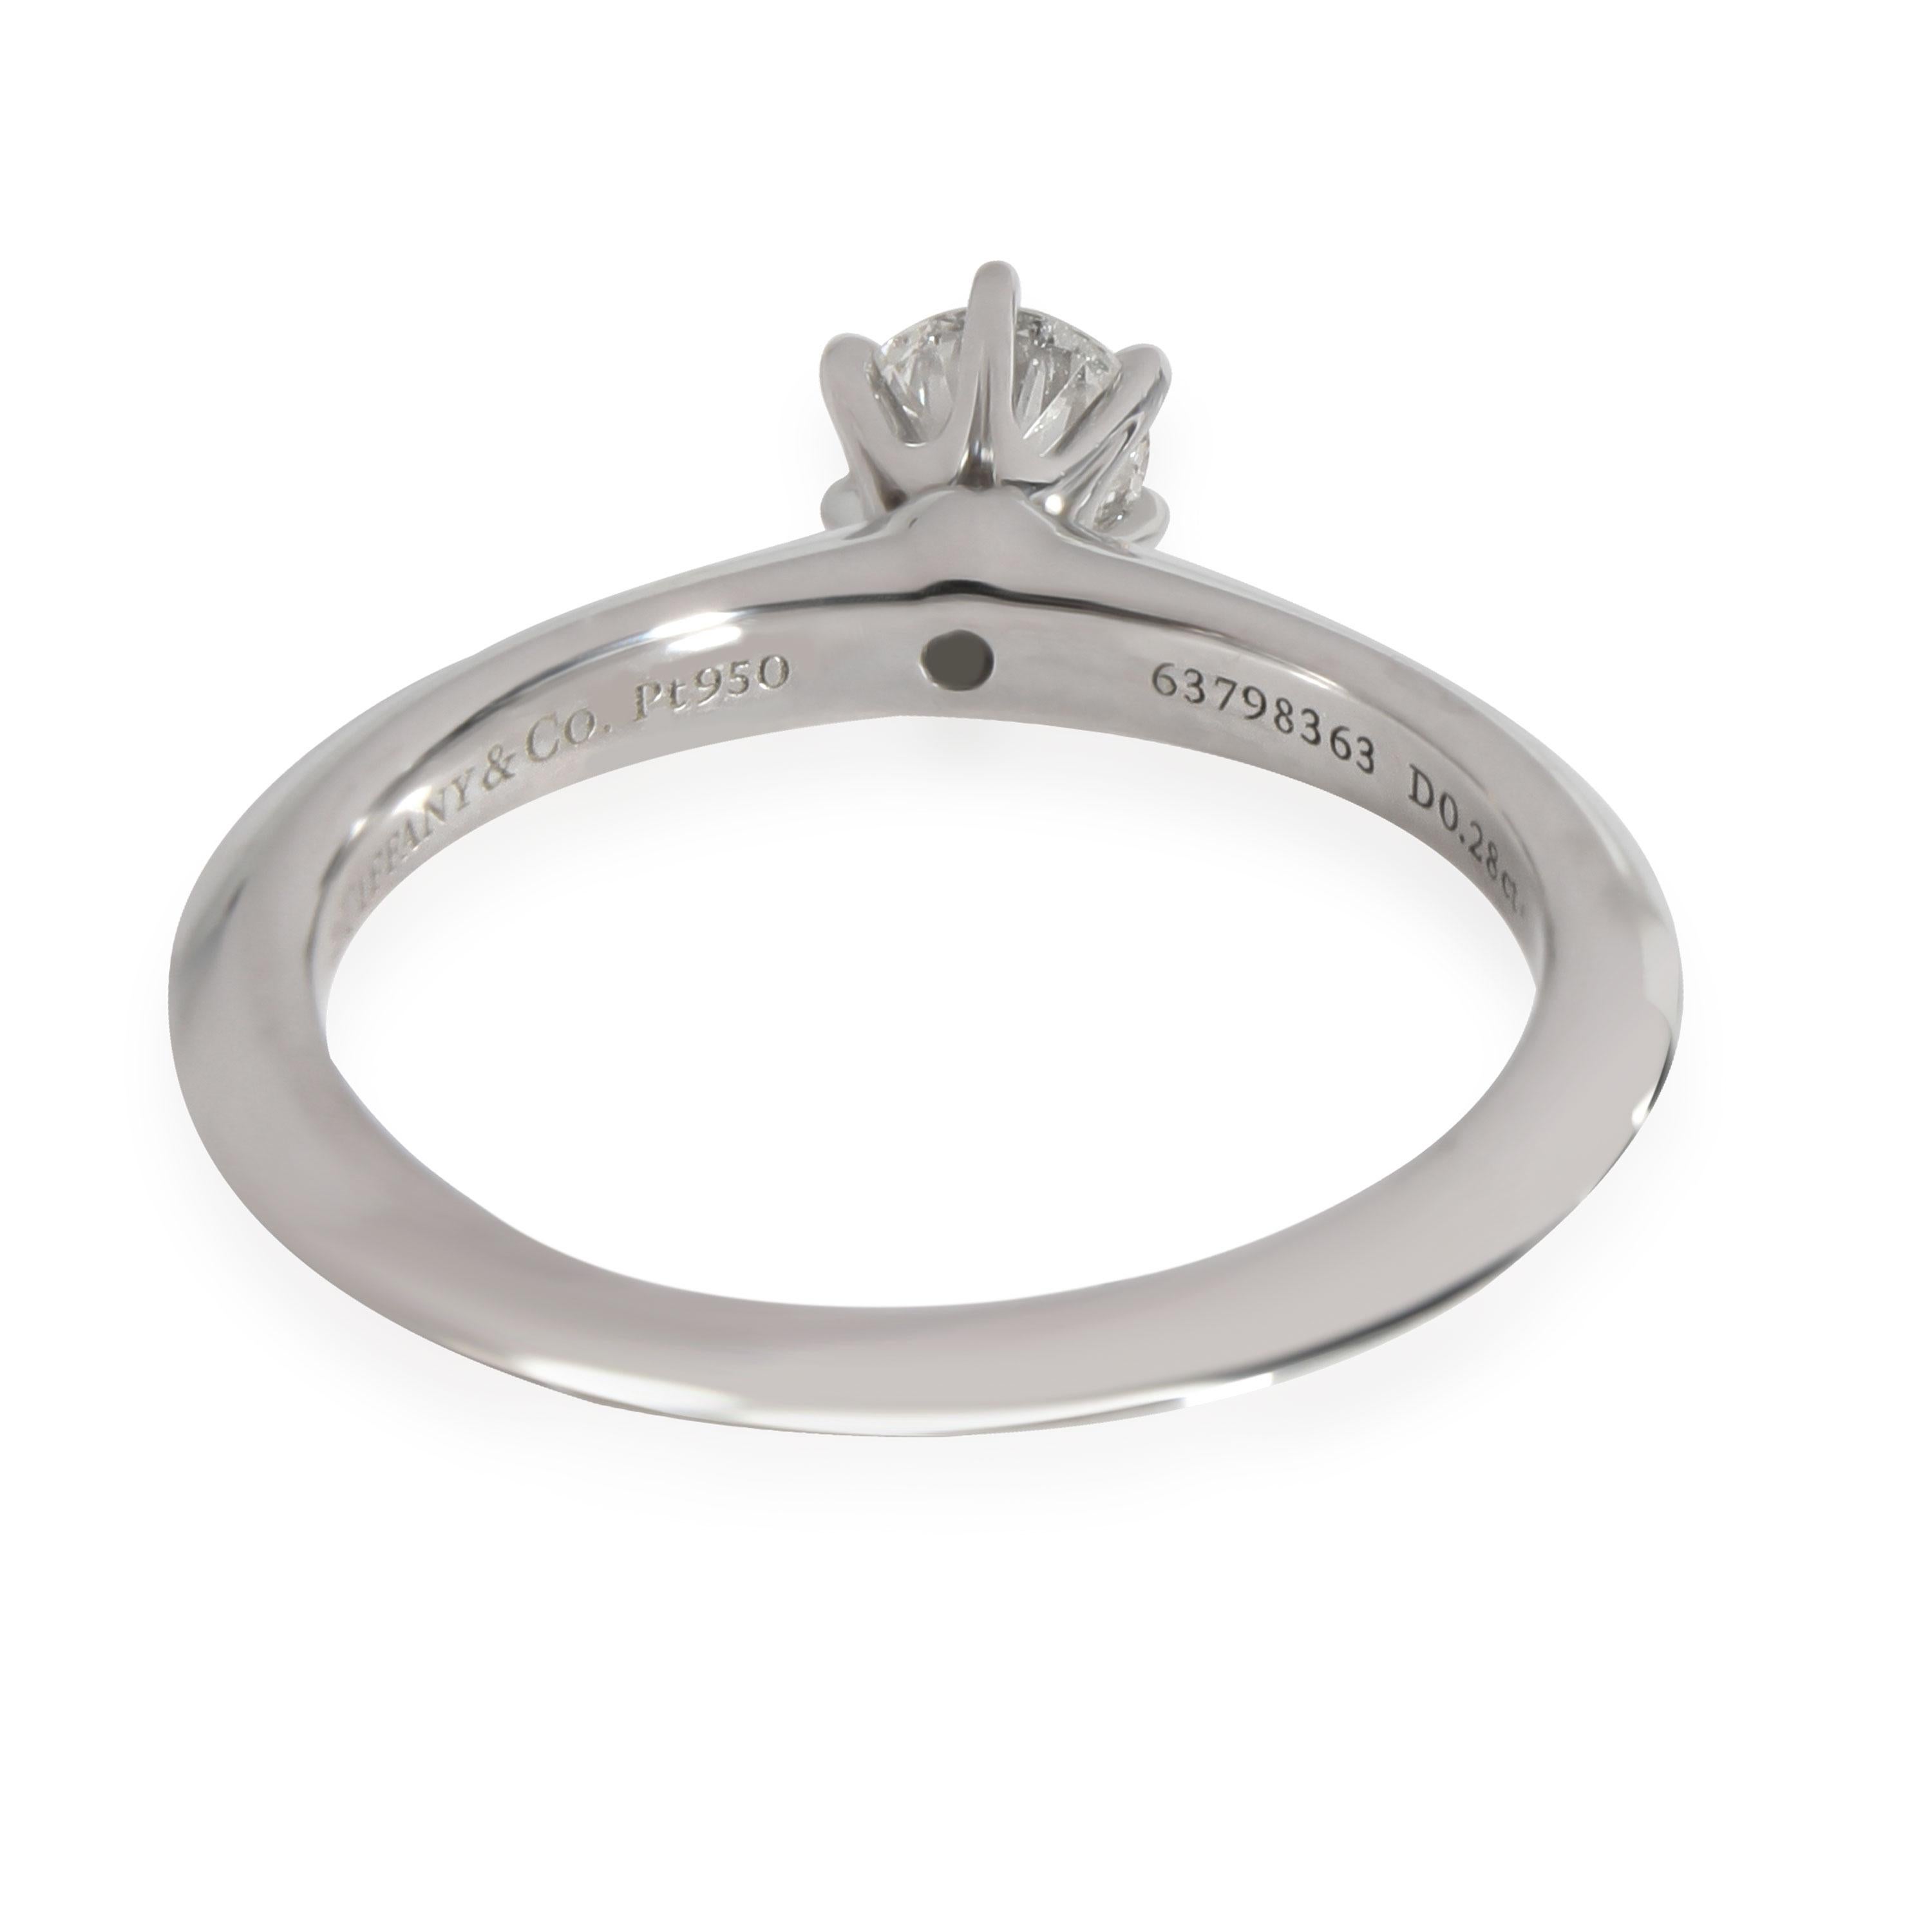 Tiffany & Co. Diamond Solitaire Engagement Ring in Platinum I VS1 0.28 CTW

PRIMARY DETAILS
SKU: 112107
Listing Title: Tiffany & Co. Diamond Solitaire Engagement Ring in Platinum I VS1 0.28 CTW
Condition Description: Retails for 2230 USD. Retails